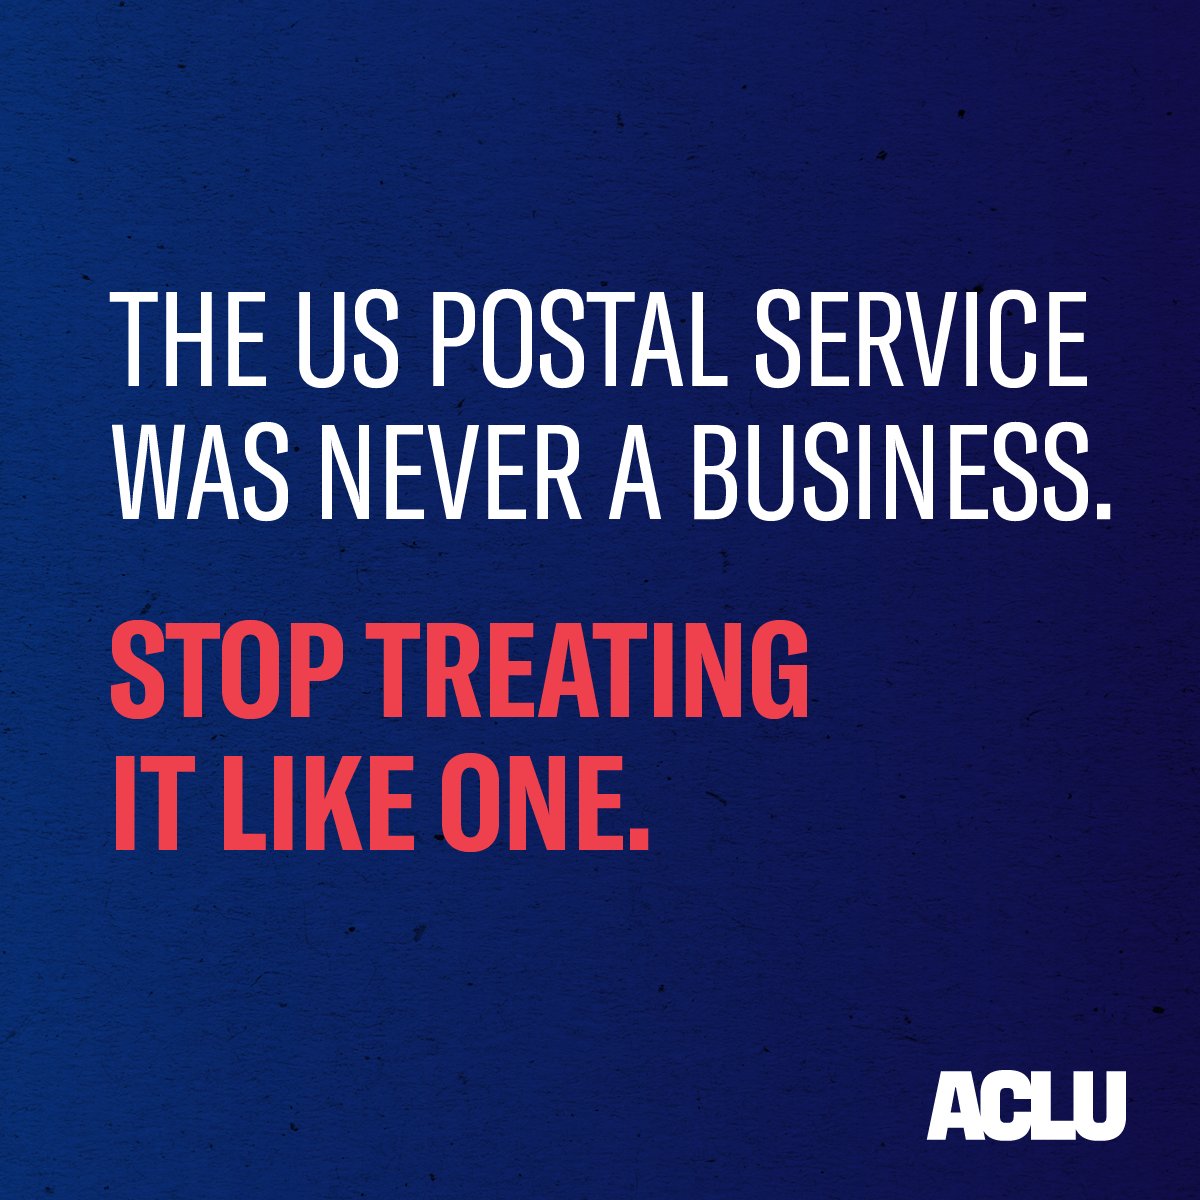  Last Friday, postmaster general Louis DeJoy told Congress that he doesn’t plan to reverse already-implemented cuts to service.Let’s go over these political attacks on the USPS, once again.